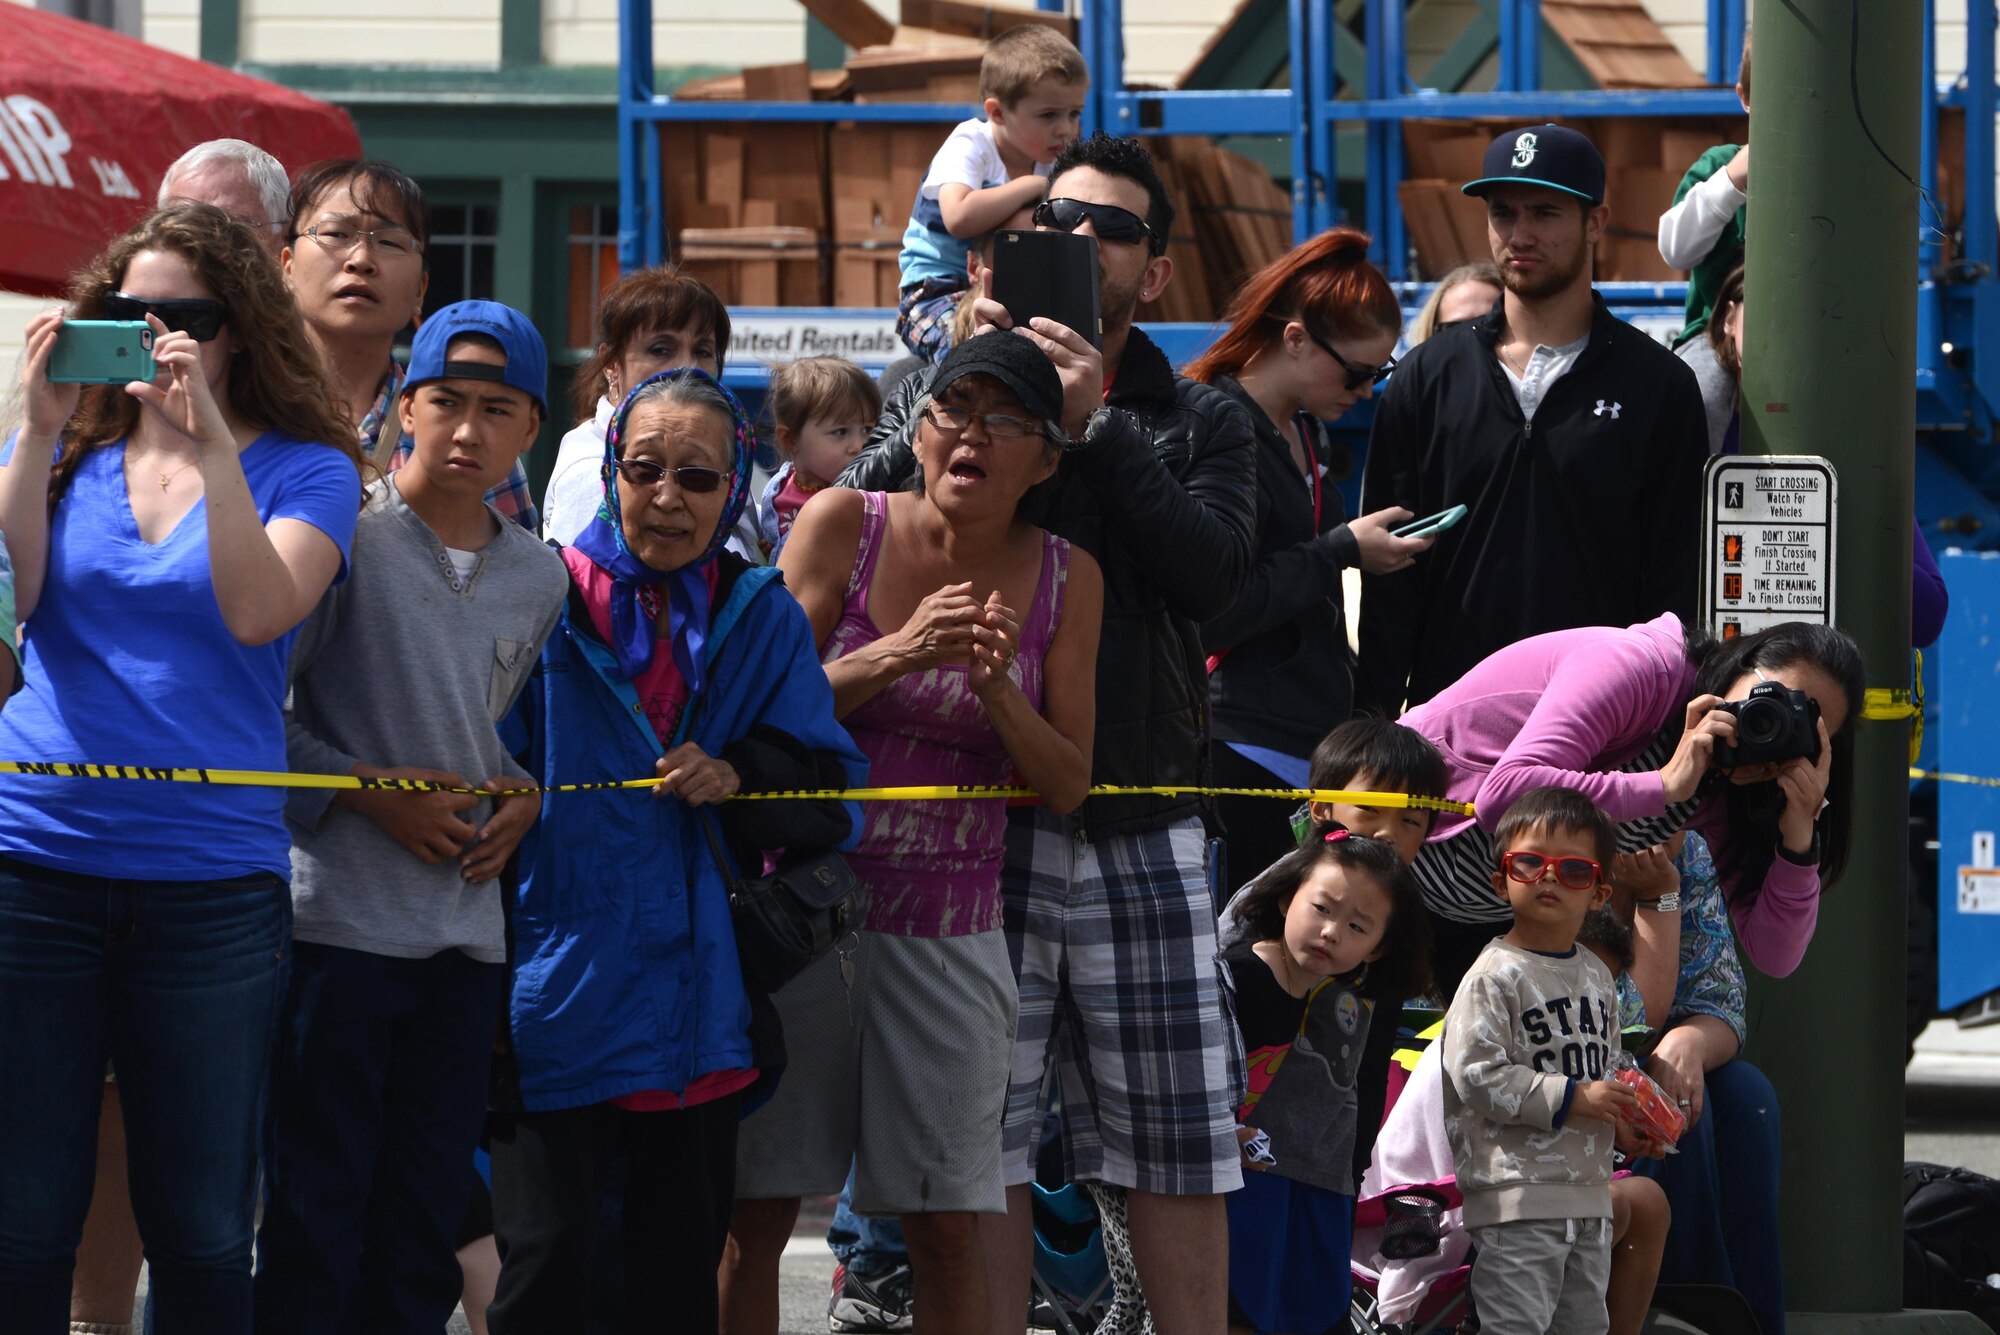 Onlookers take photos and watch the Hero Games during the Downtown Summer Solstice Festival in Anchorage, Alaska, June 18, 2016. Anchorage’s Town Square was surrounded by numerous events and vendors for people to enjoy, including the Hero Games, a friendly competition between Alaska’s first responders with challenges that require balance, strength and teamwork. (U.S. Air Force photo Airman 1st Class Christopher R. Morales)